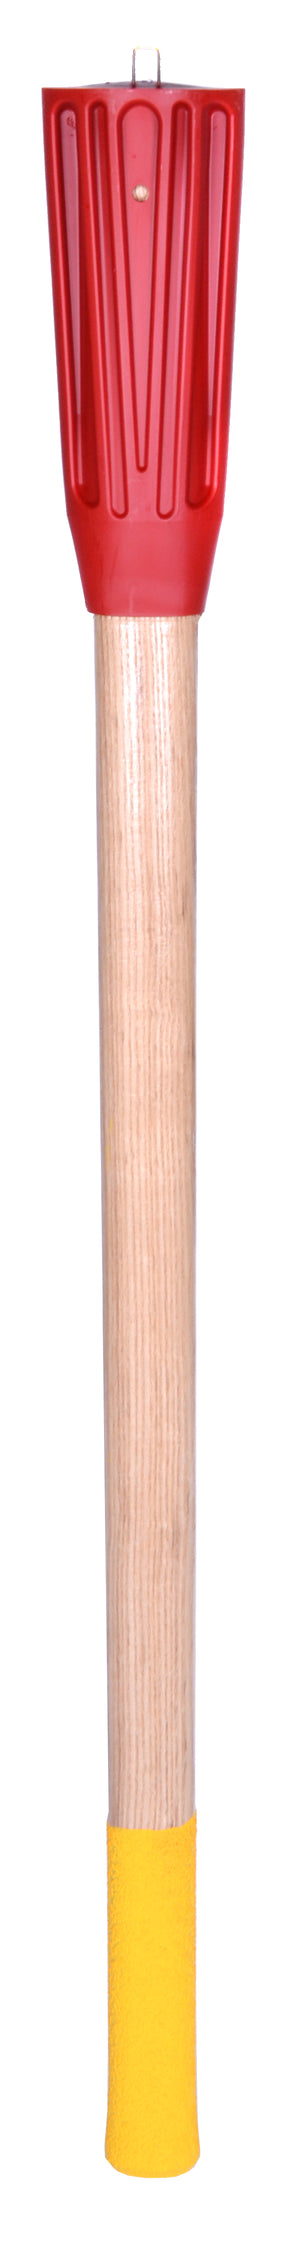 Pick replacement handle, wood